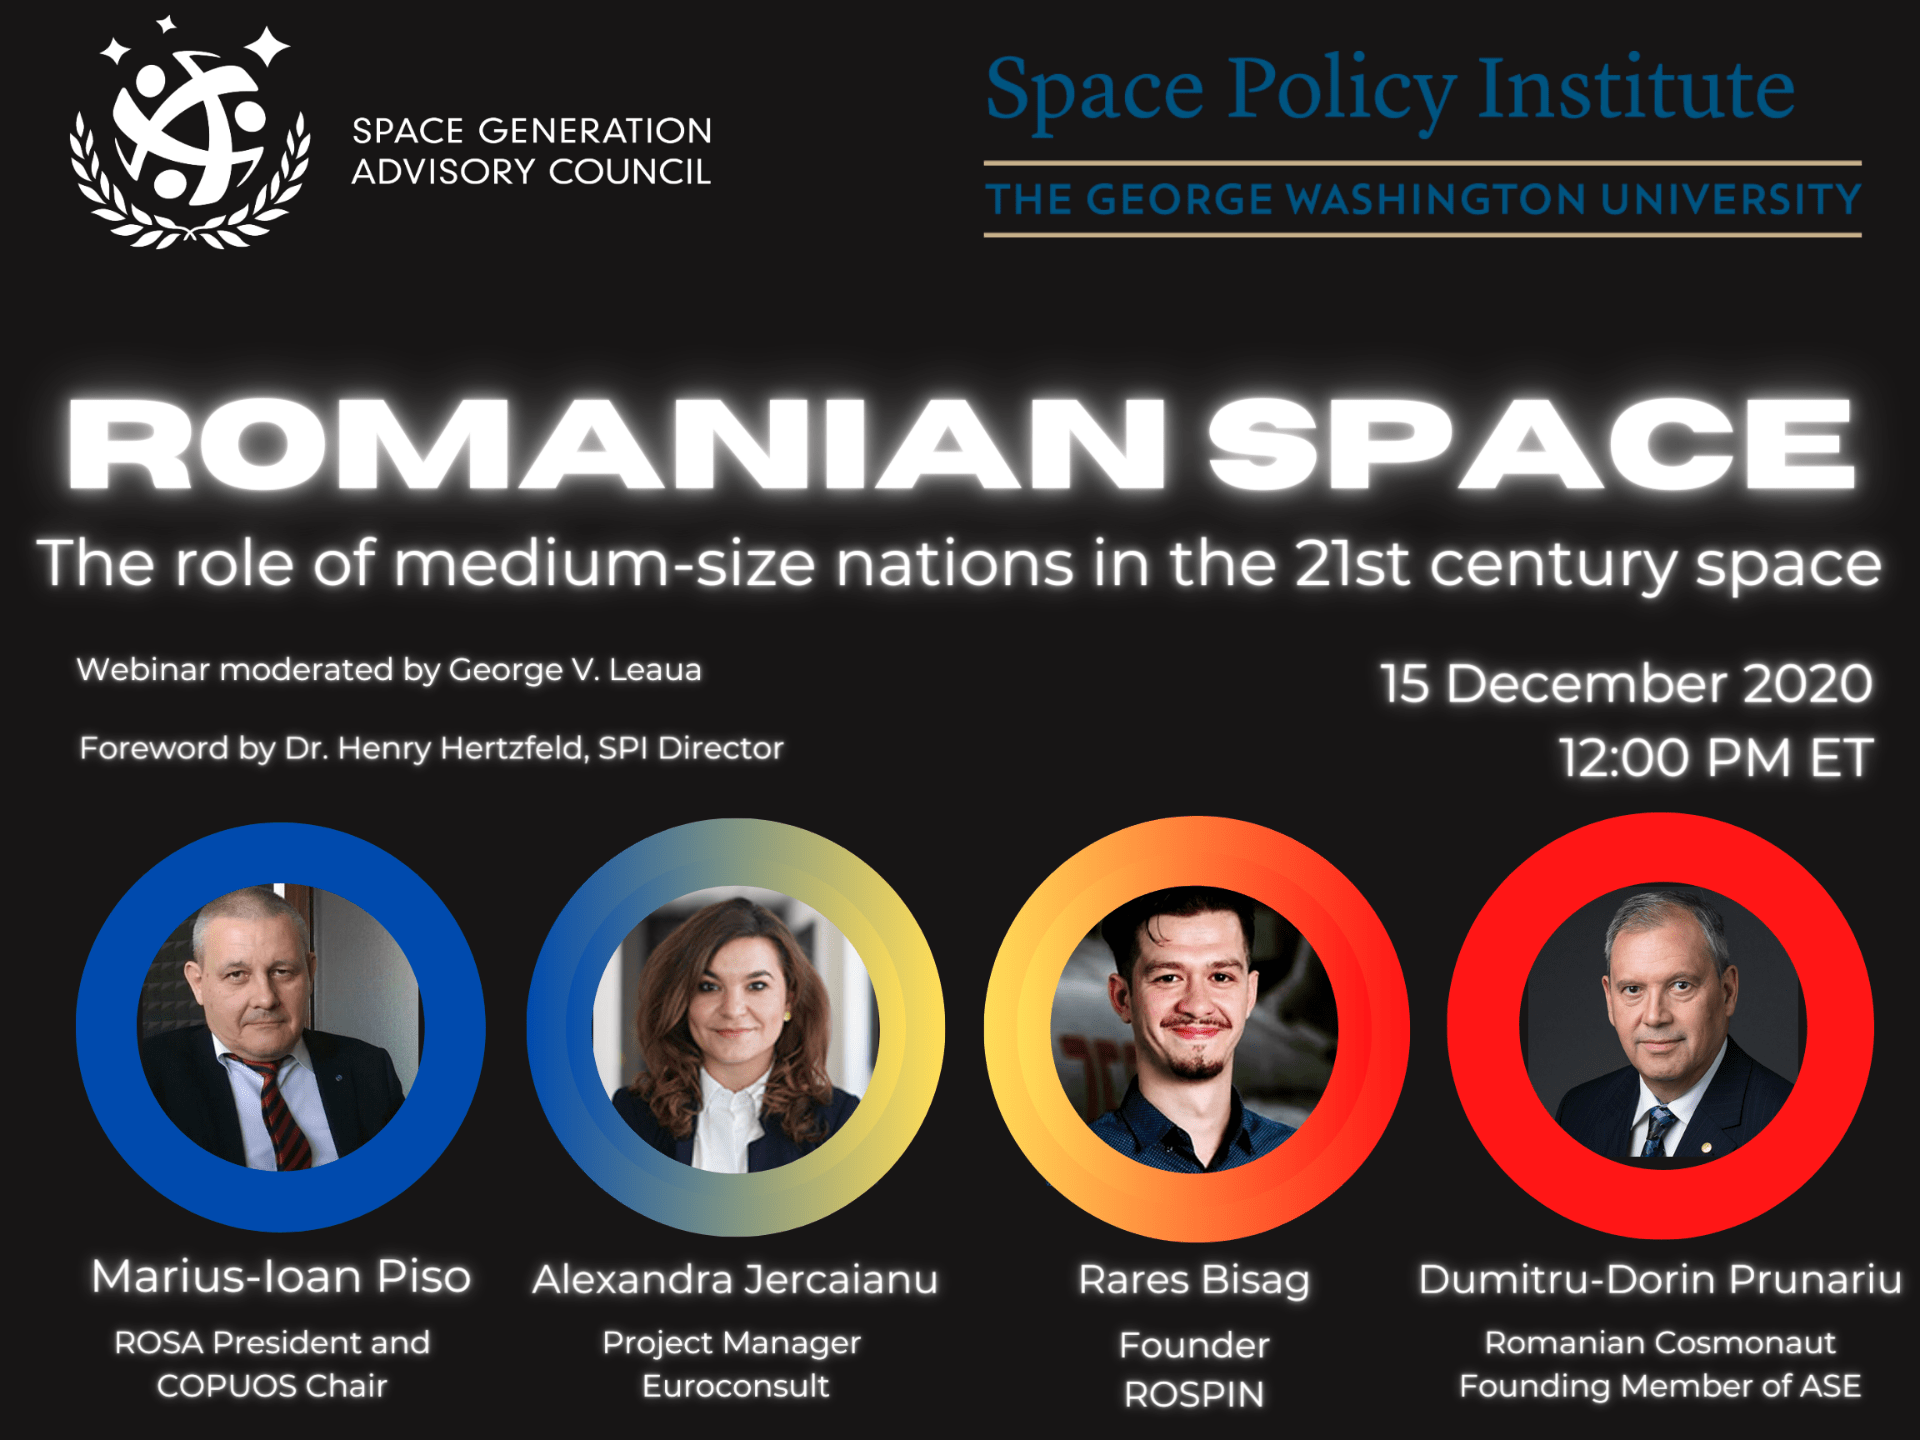 Romanian Space: The role of medium-size nations in the 21st century space